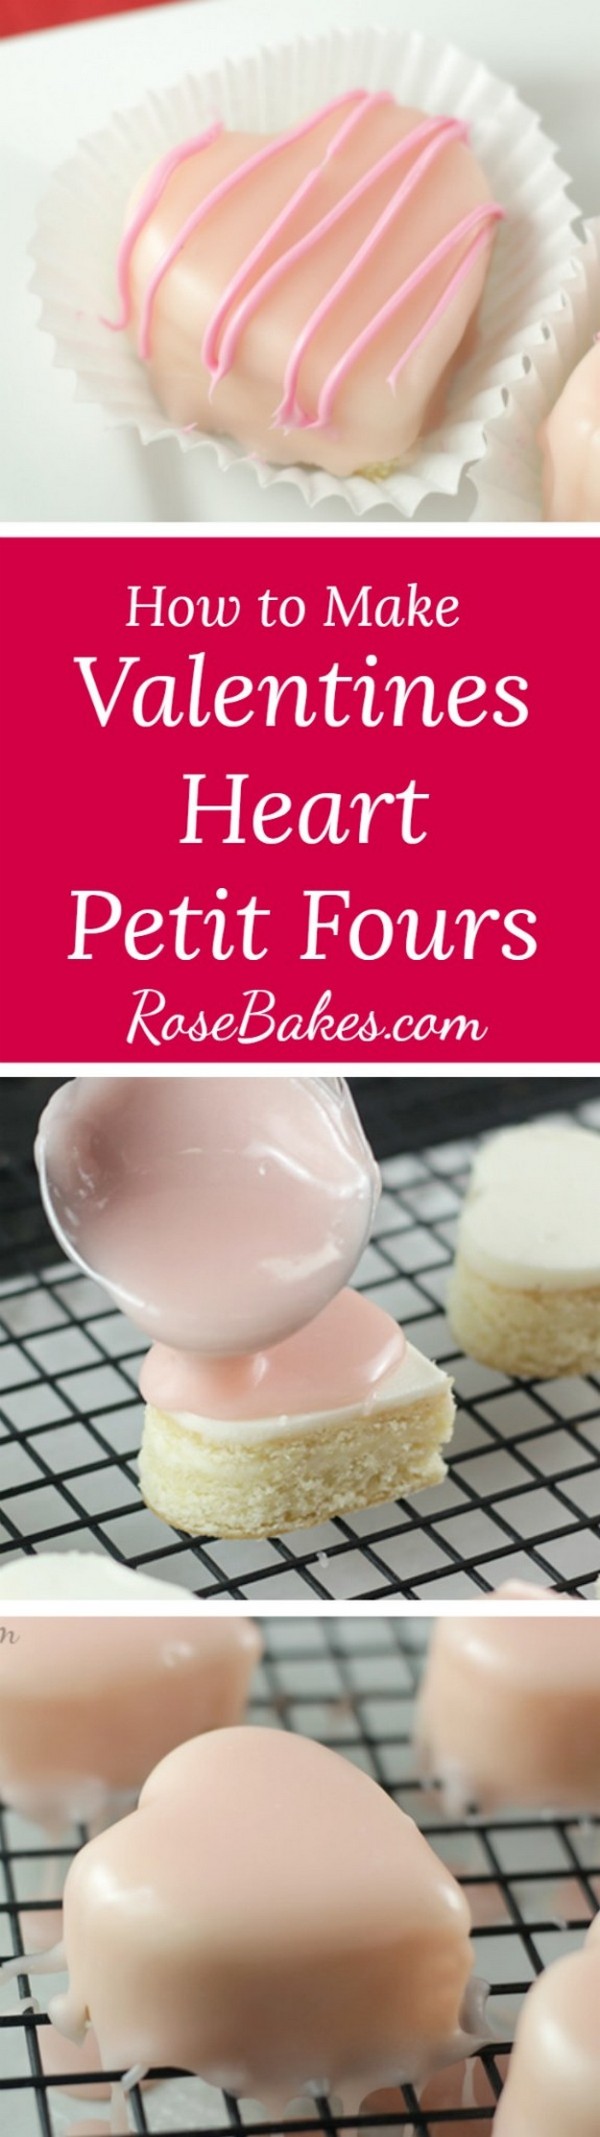 How To Make Valentine’s Heart Petit Fours